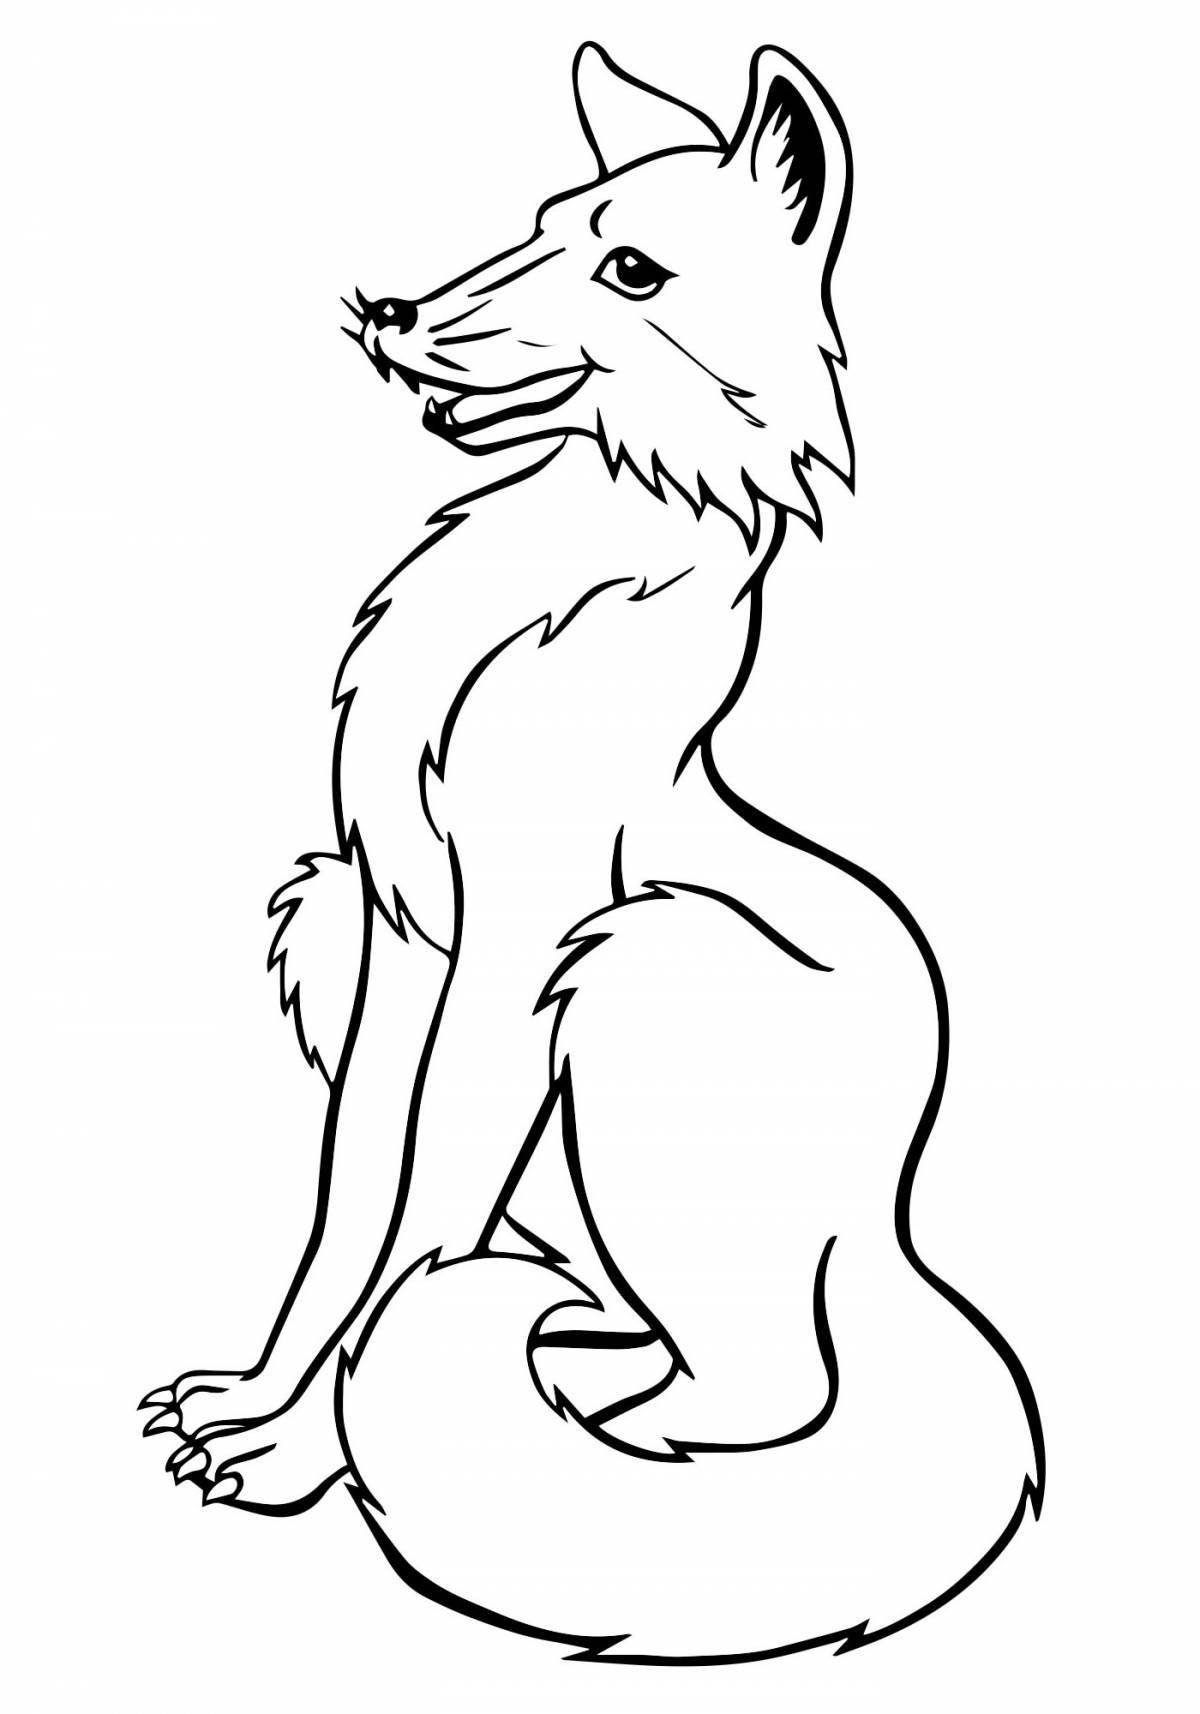 Coloring page dazzling fox